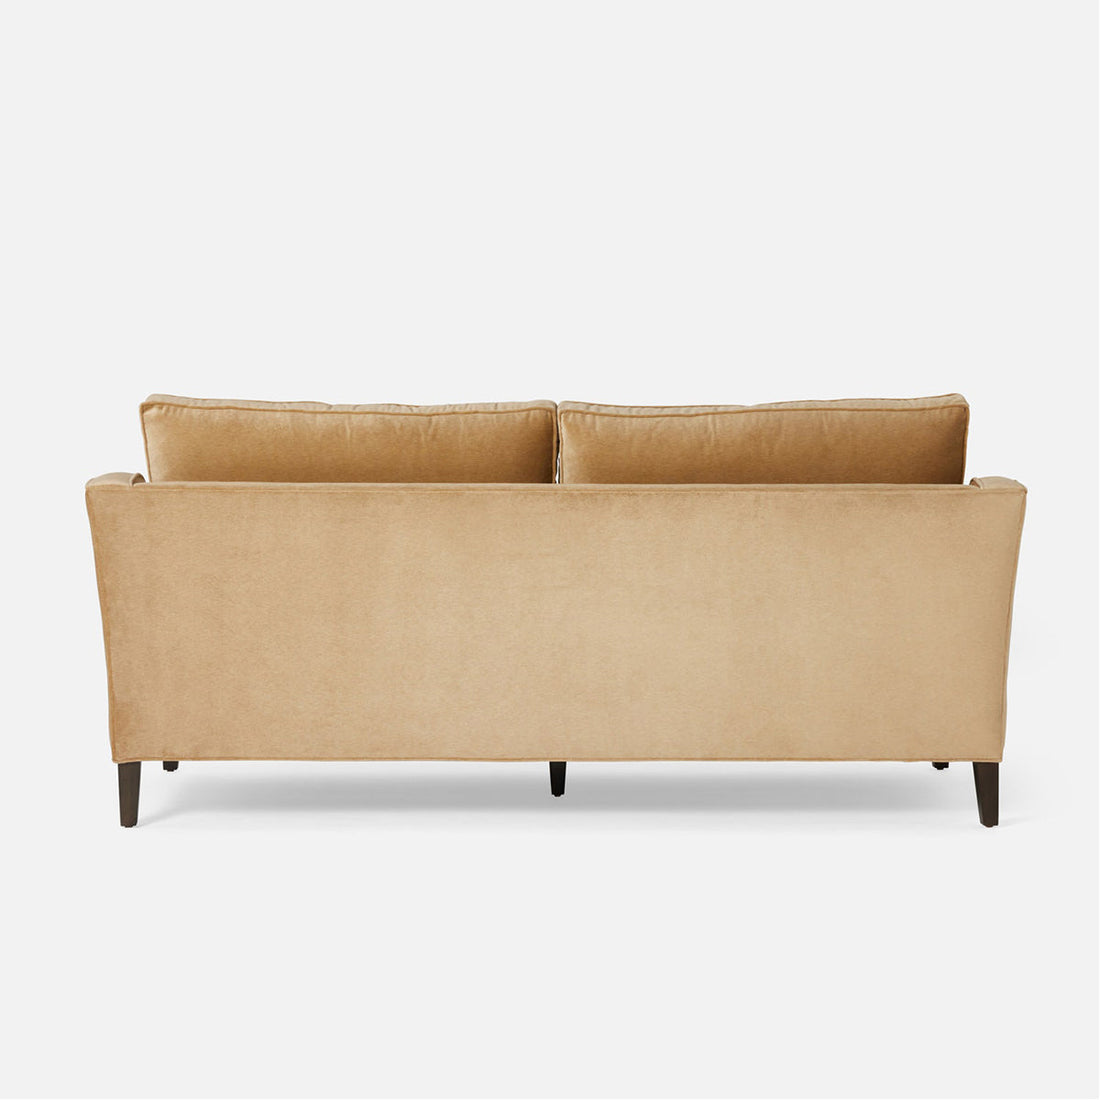 Made Goods Holbeck Sofa in Pagua Fabric